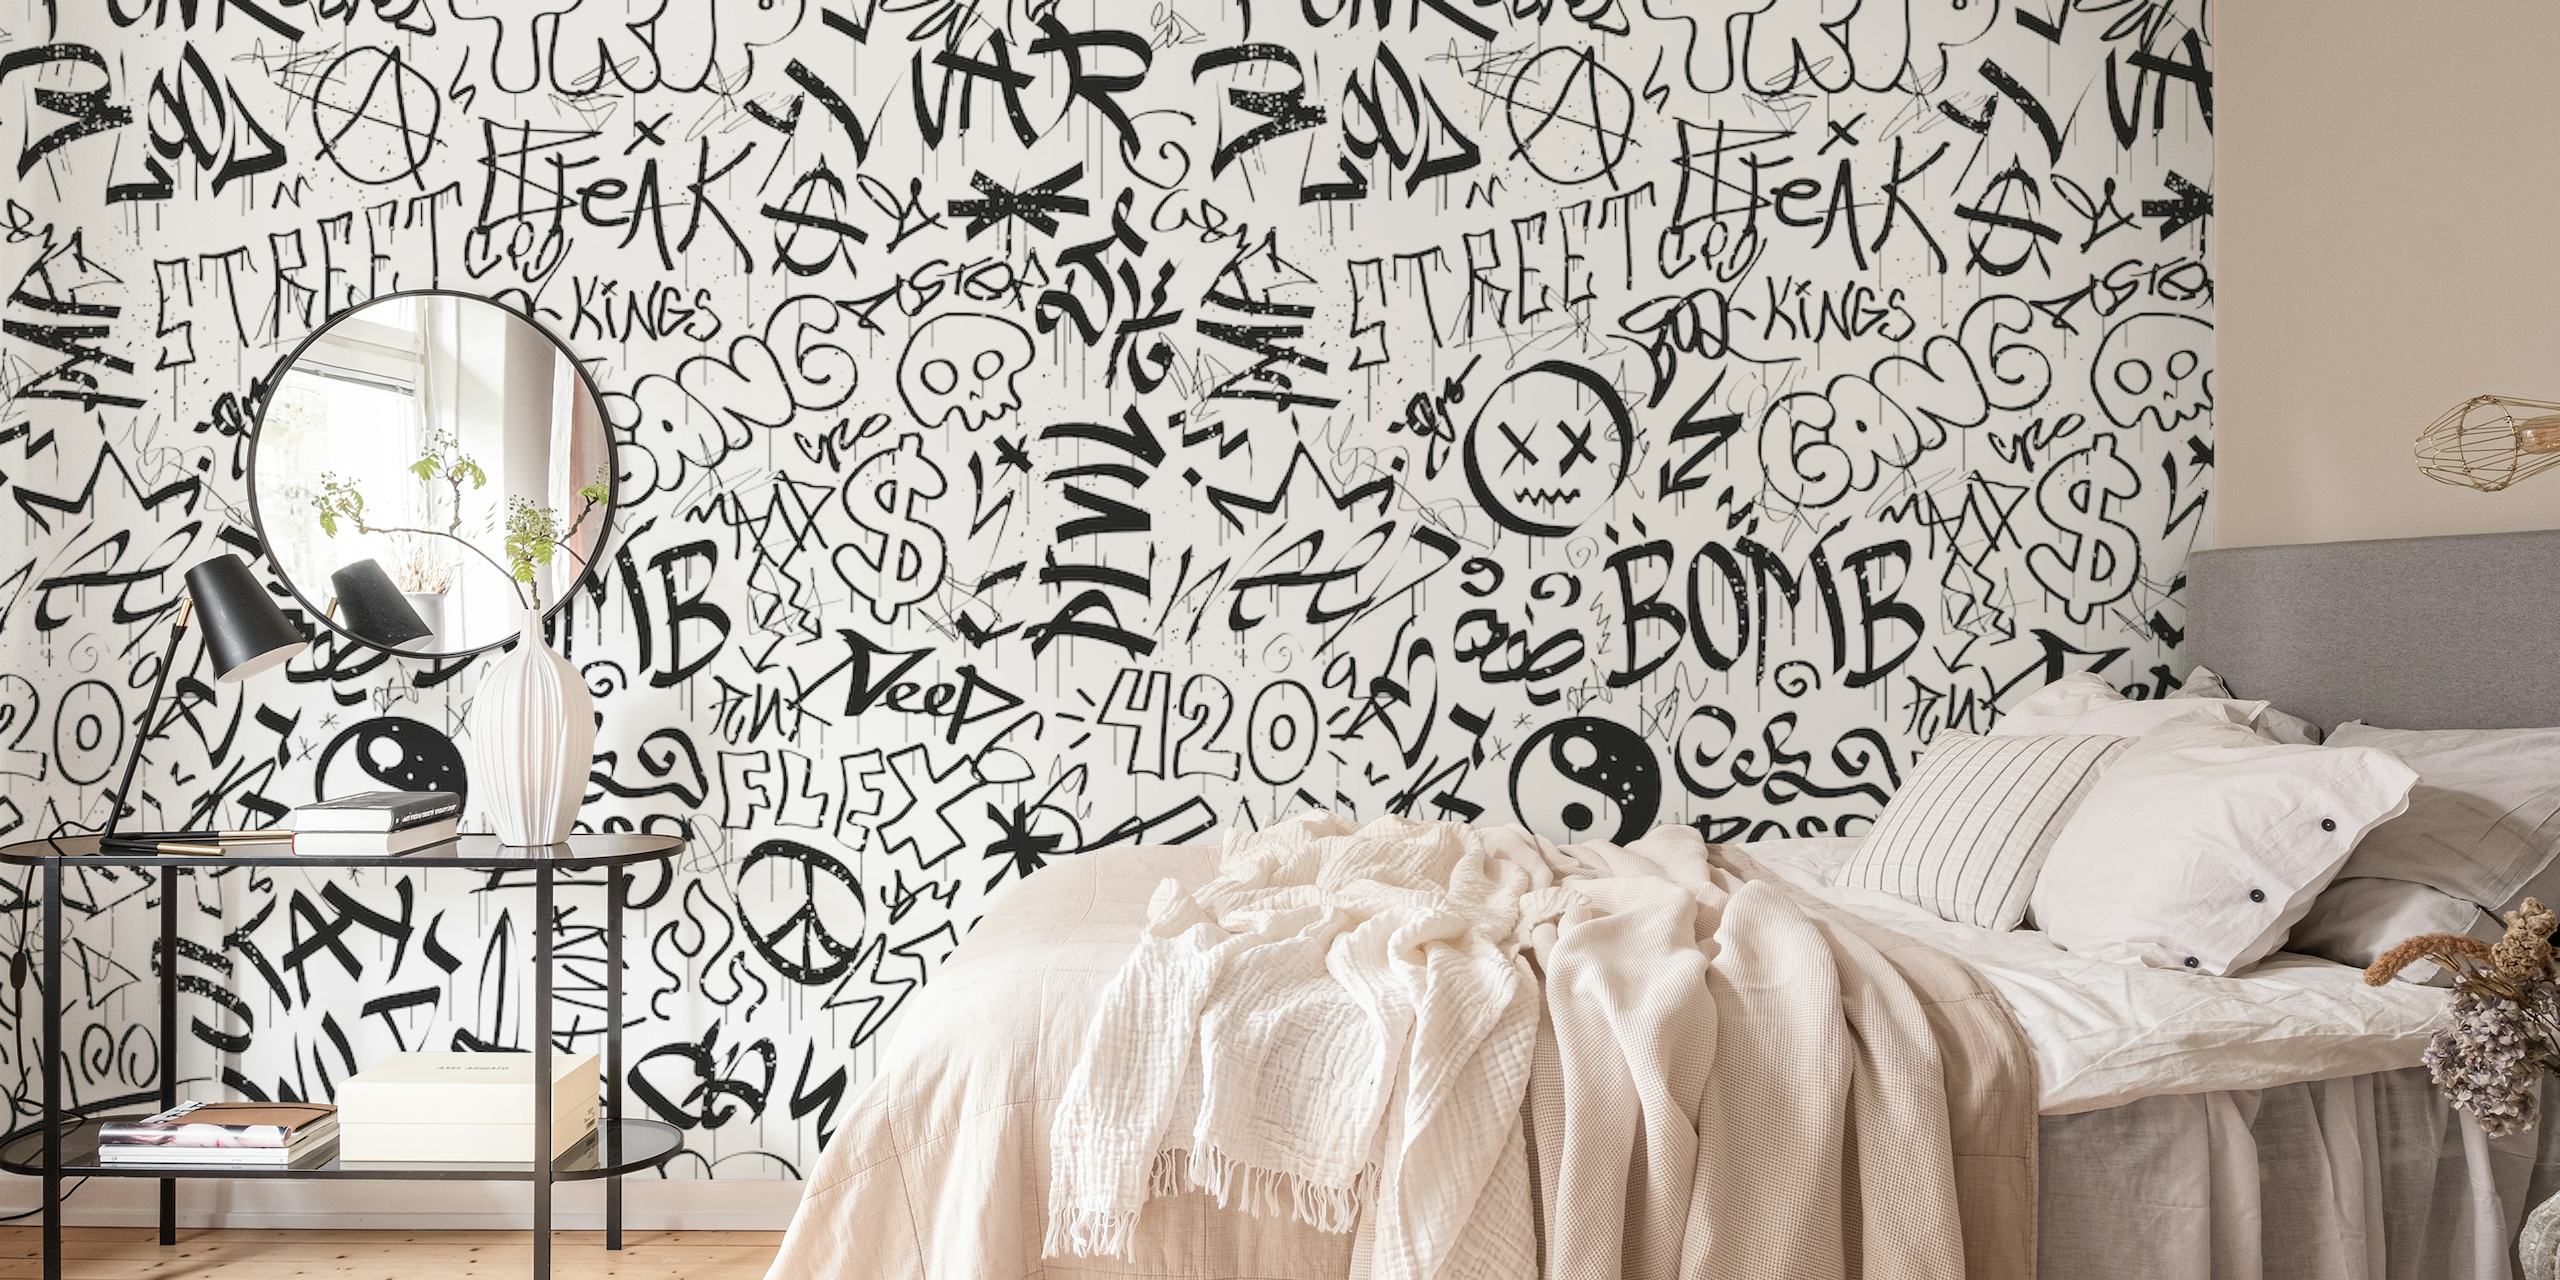 Black and white graffiti-style wall mural with various tags and characters.